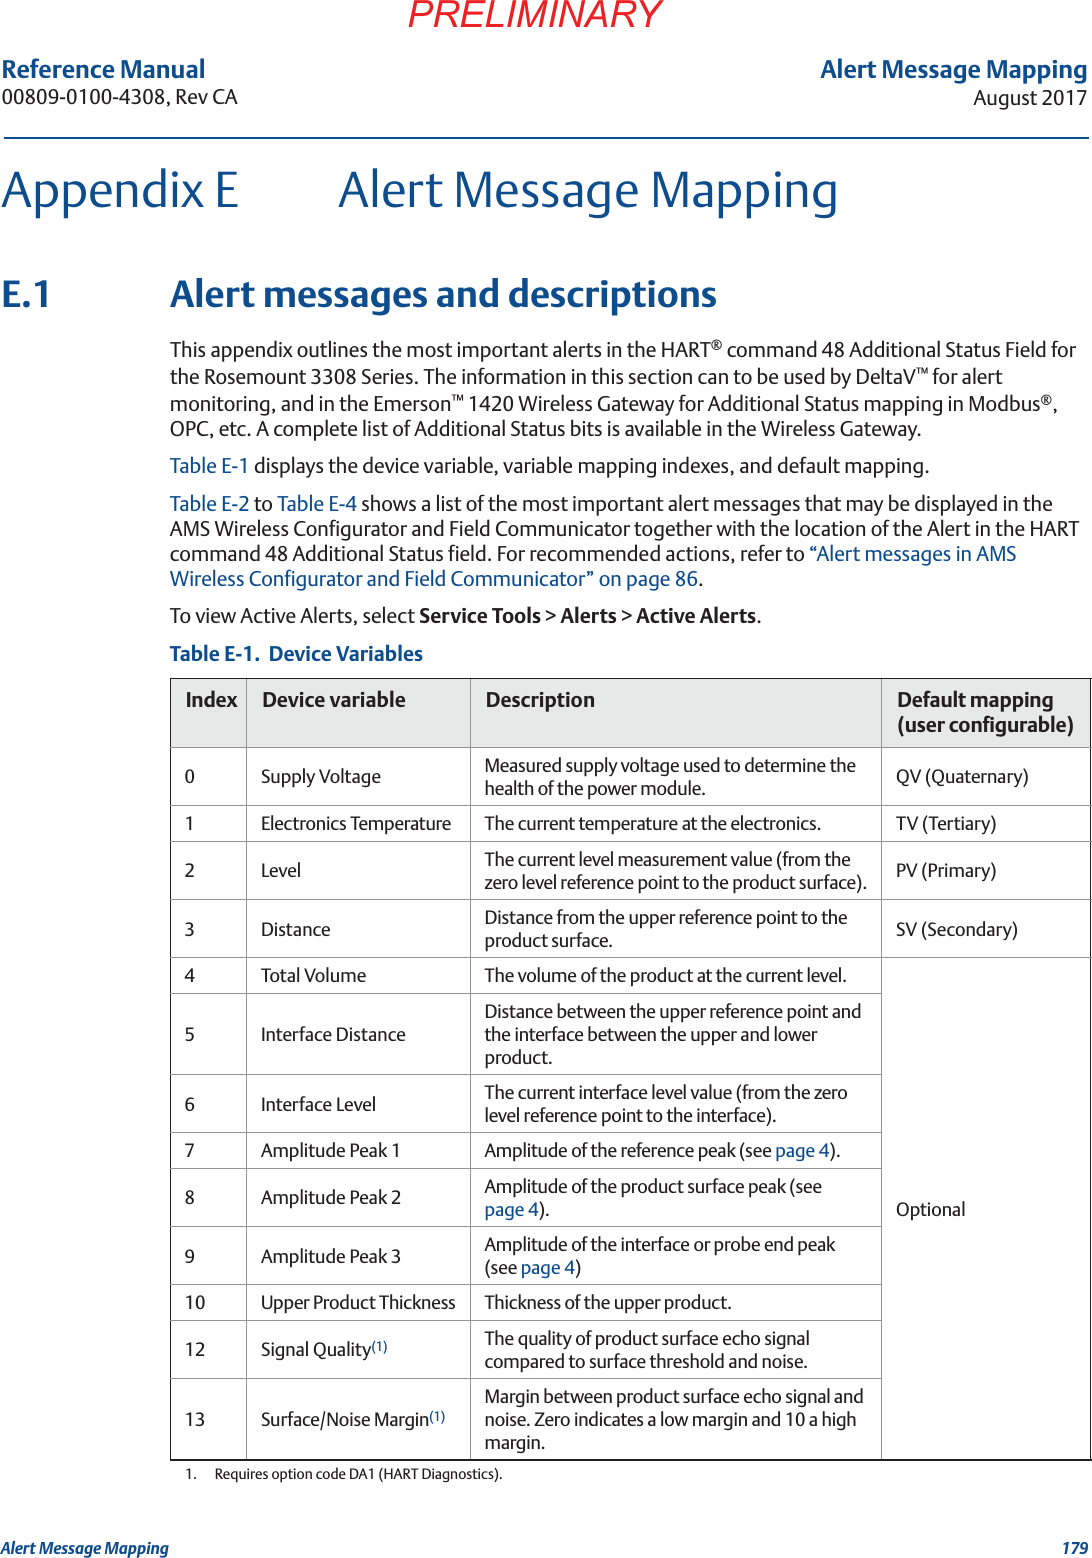 179Alert Message MappingAugust 2017Alert Message MappingPRELIMINARYReference Manual 00809-0100-4308, Rev CAAppendix E Alert Message MappingE.1 Alert messages and descriptionsThis appendix outlines the most important alerts in the HART® command 48 Additional Status Field for the Rosemount 3308 Series. The information in this section can to be used by DeltaV™ for alert monitoring, and in the Emerson™ 1420 Wireless Gateway for Additional Status mapping in Modbus®, OPC, etc. A complete list of Additional Status bits is available in the Wireless Gateway.Table E-1 displays the device variable, variable mapping indexes, and default mapping.Table E-2 to Table E-4 shows a list of the most important alert messages that may be displayed in the AMS Wireless Configurator and Field Communicator together with the location of the Alert in the HART command 48 Additional Status field. For recommended actions, refer to “Alert messages in AMS Wireless Configurator and Field Communicator” on page 86.To view Active Alerts, select Service Tools &gt; Alerts &gt; Active Alerts.Table E-1.  Device VariablesIndex Device variable Description Default mapping(user configurable)0Supply Voltage Measured supply voltage used to determine the health of the power module.  QV (Quaternary)1Electronics Temperature The current temperature at the electronics. TV (Tertiary)2Level The current level measurement value (from the zero level reference point to the product surface). PV (Primary)3Distance Distance from the upper reference point to the product surface. SV (Secondary)4Total Volume The volume of the product at the current level.Optional5Interface DistanceDistance between the upper reference point and the interface between the upper and lower product.6Interface Level The current interface level value (from the zero level reference point to the interface).7Amplitude Peak 1 Amplitude of the reference peak (see page 4).8Amplitude Peak 2 Amplitude of the product surface peak (see page 4).9Amplitude Peak 3 Amplitude of the interface or probe end peak (see page 4)10 Upper Product Thickness Thickness of the upper product.12 Signal Quality(1)1.  Requires option code DA1 (HART Diagnostics).The quality of product surface echo signal compared to surface threshold and noise.13 Surface/Noise Margin(1)Margin between product surface echo signal and noise. Zero indicates a low margin and 10 a high margin.